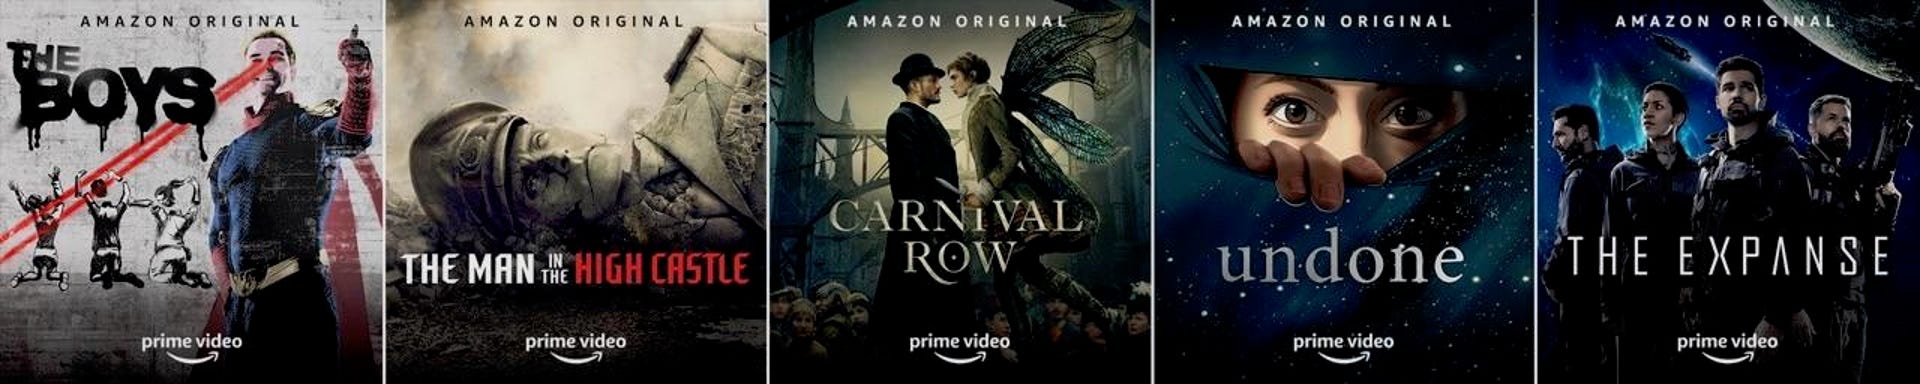 amazon-prime-video-at-sdcc-2019